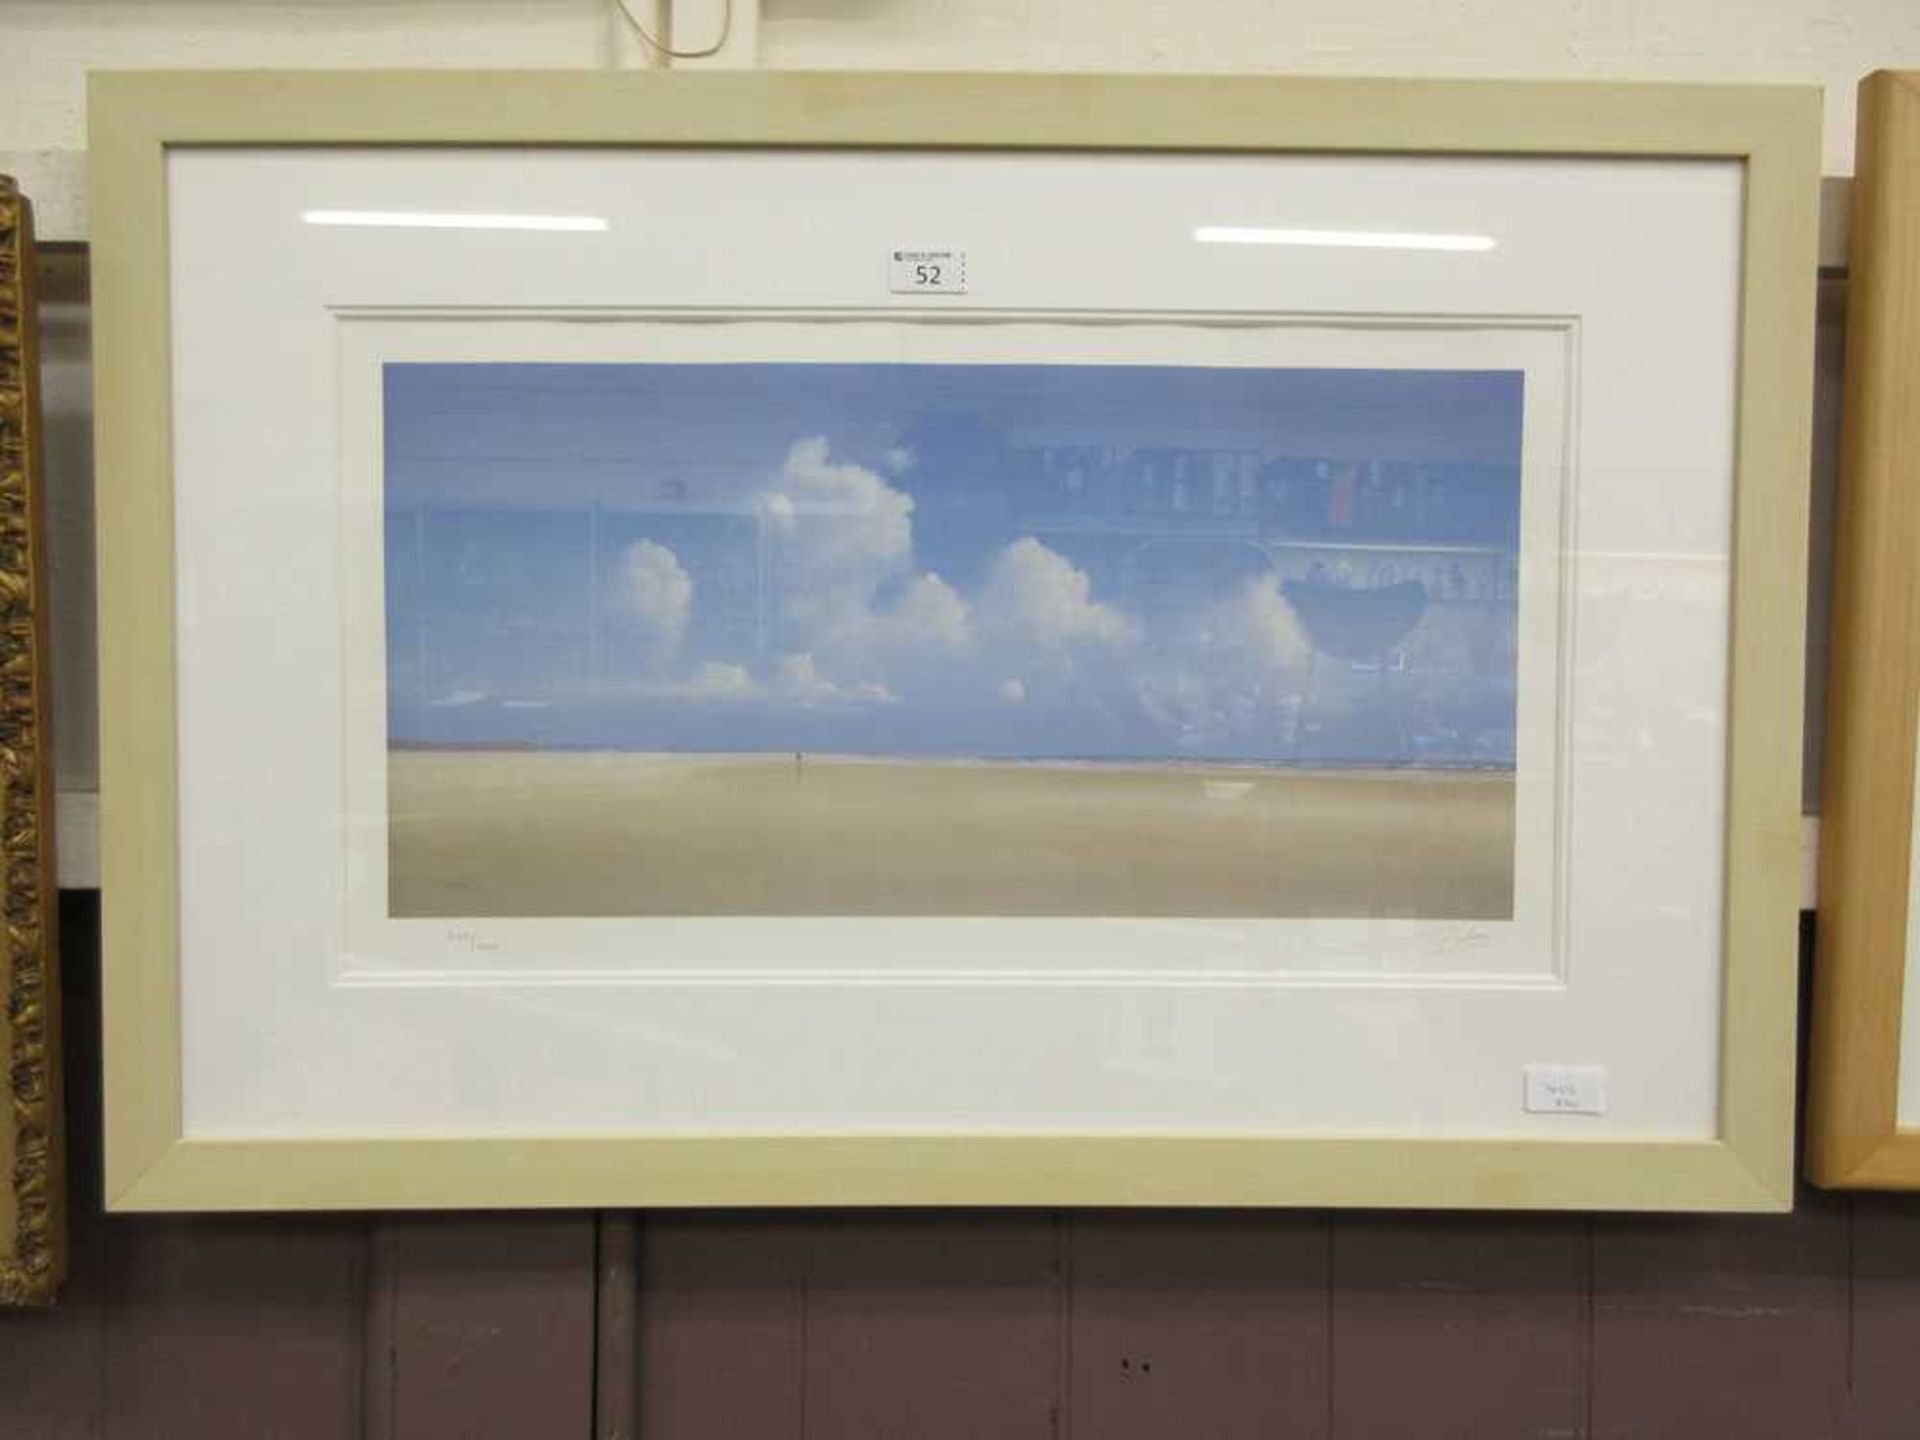 A framed and glazed limited edition medium photo lithograph of beach scene no.245/600 signed in